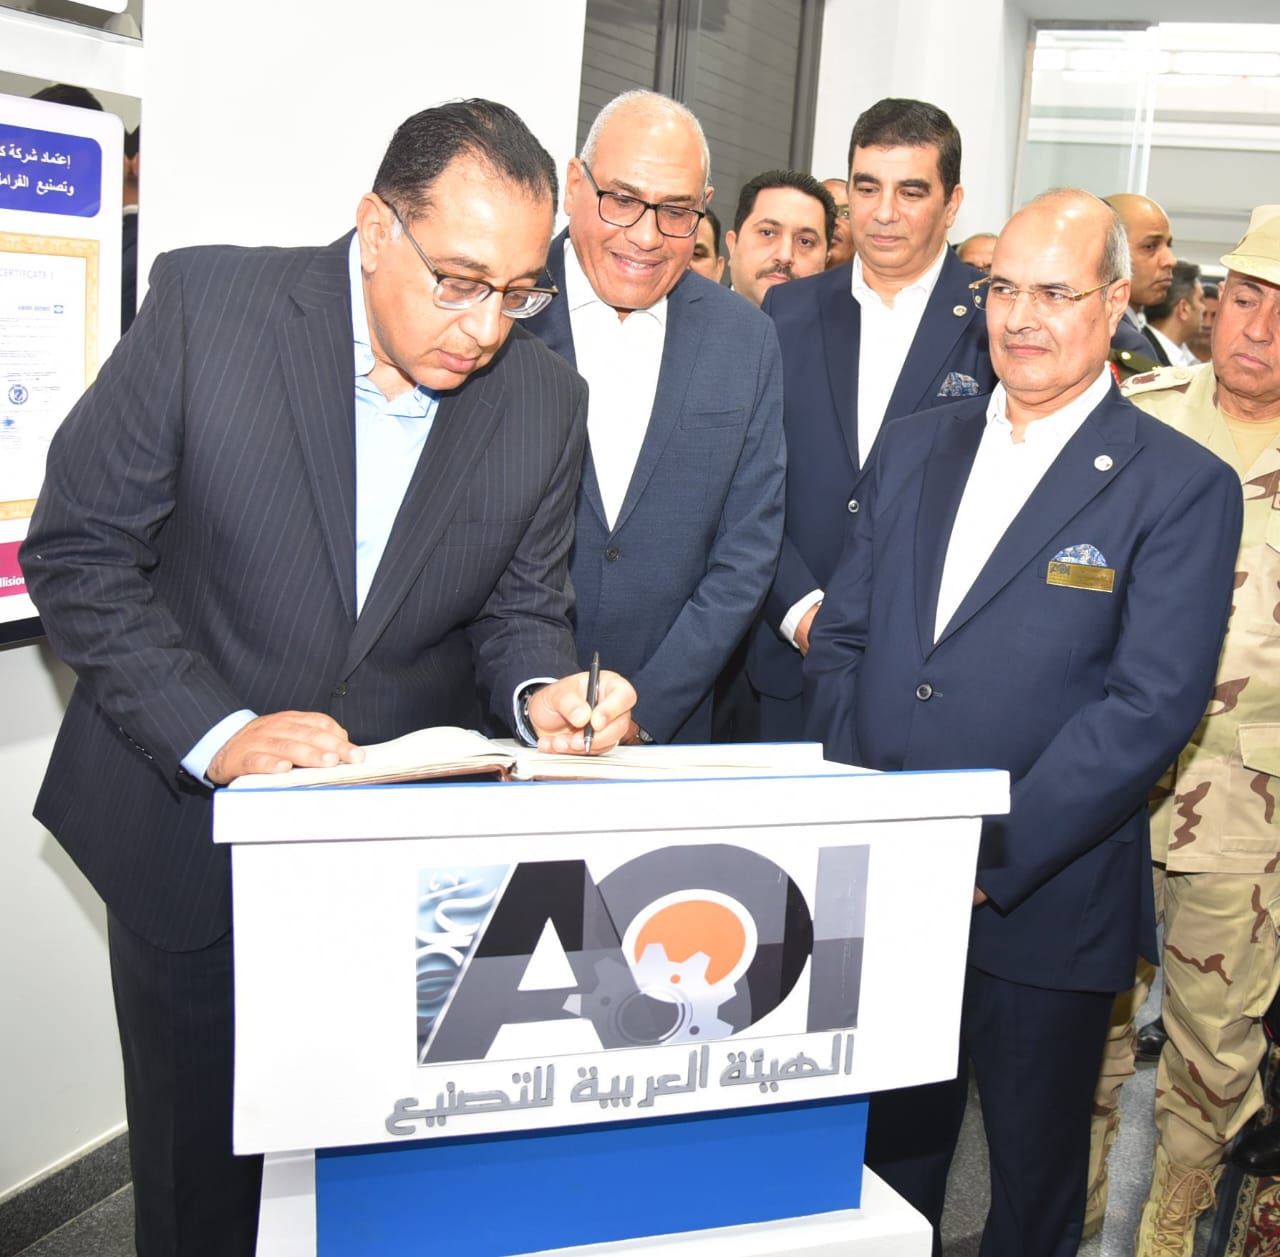 The Prime Minister witnesses the inauguration of the Digital Manufacturing Center at the "Arab Organization for Industrialization" engine factory